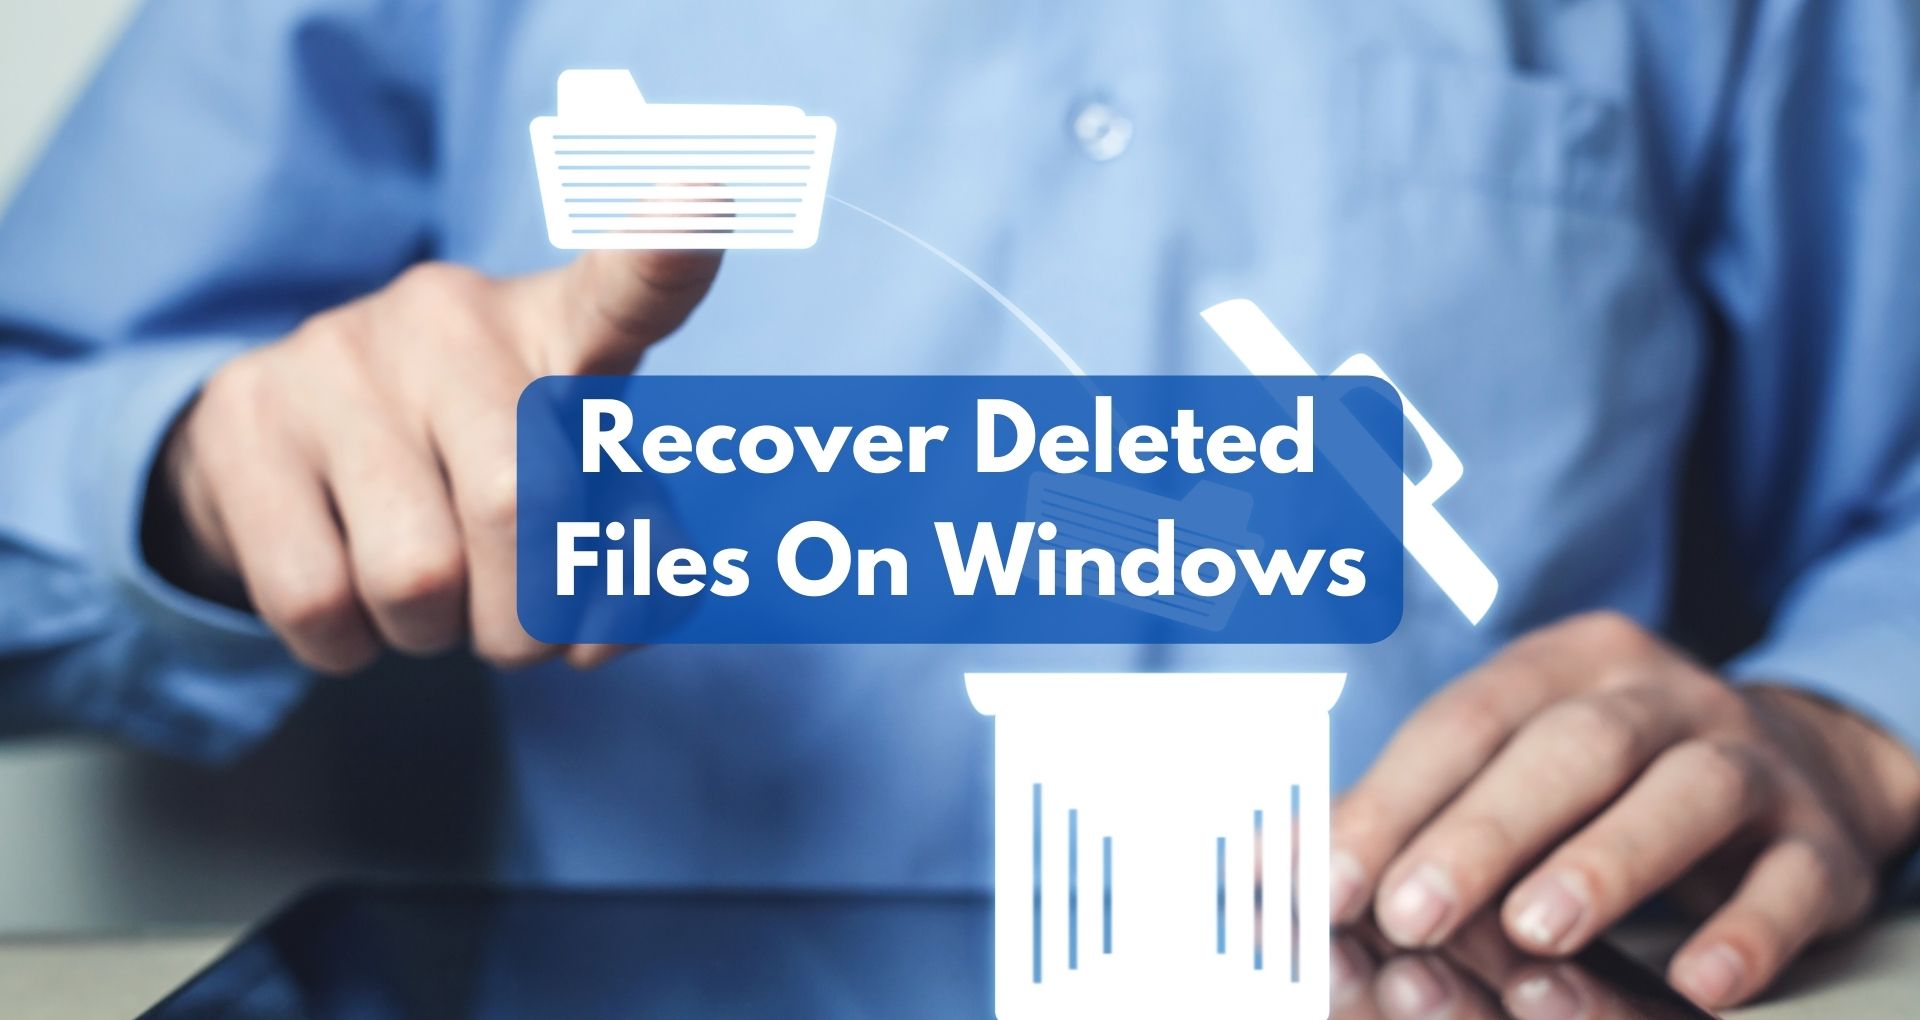 How To Recover Deleted Files On Windows